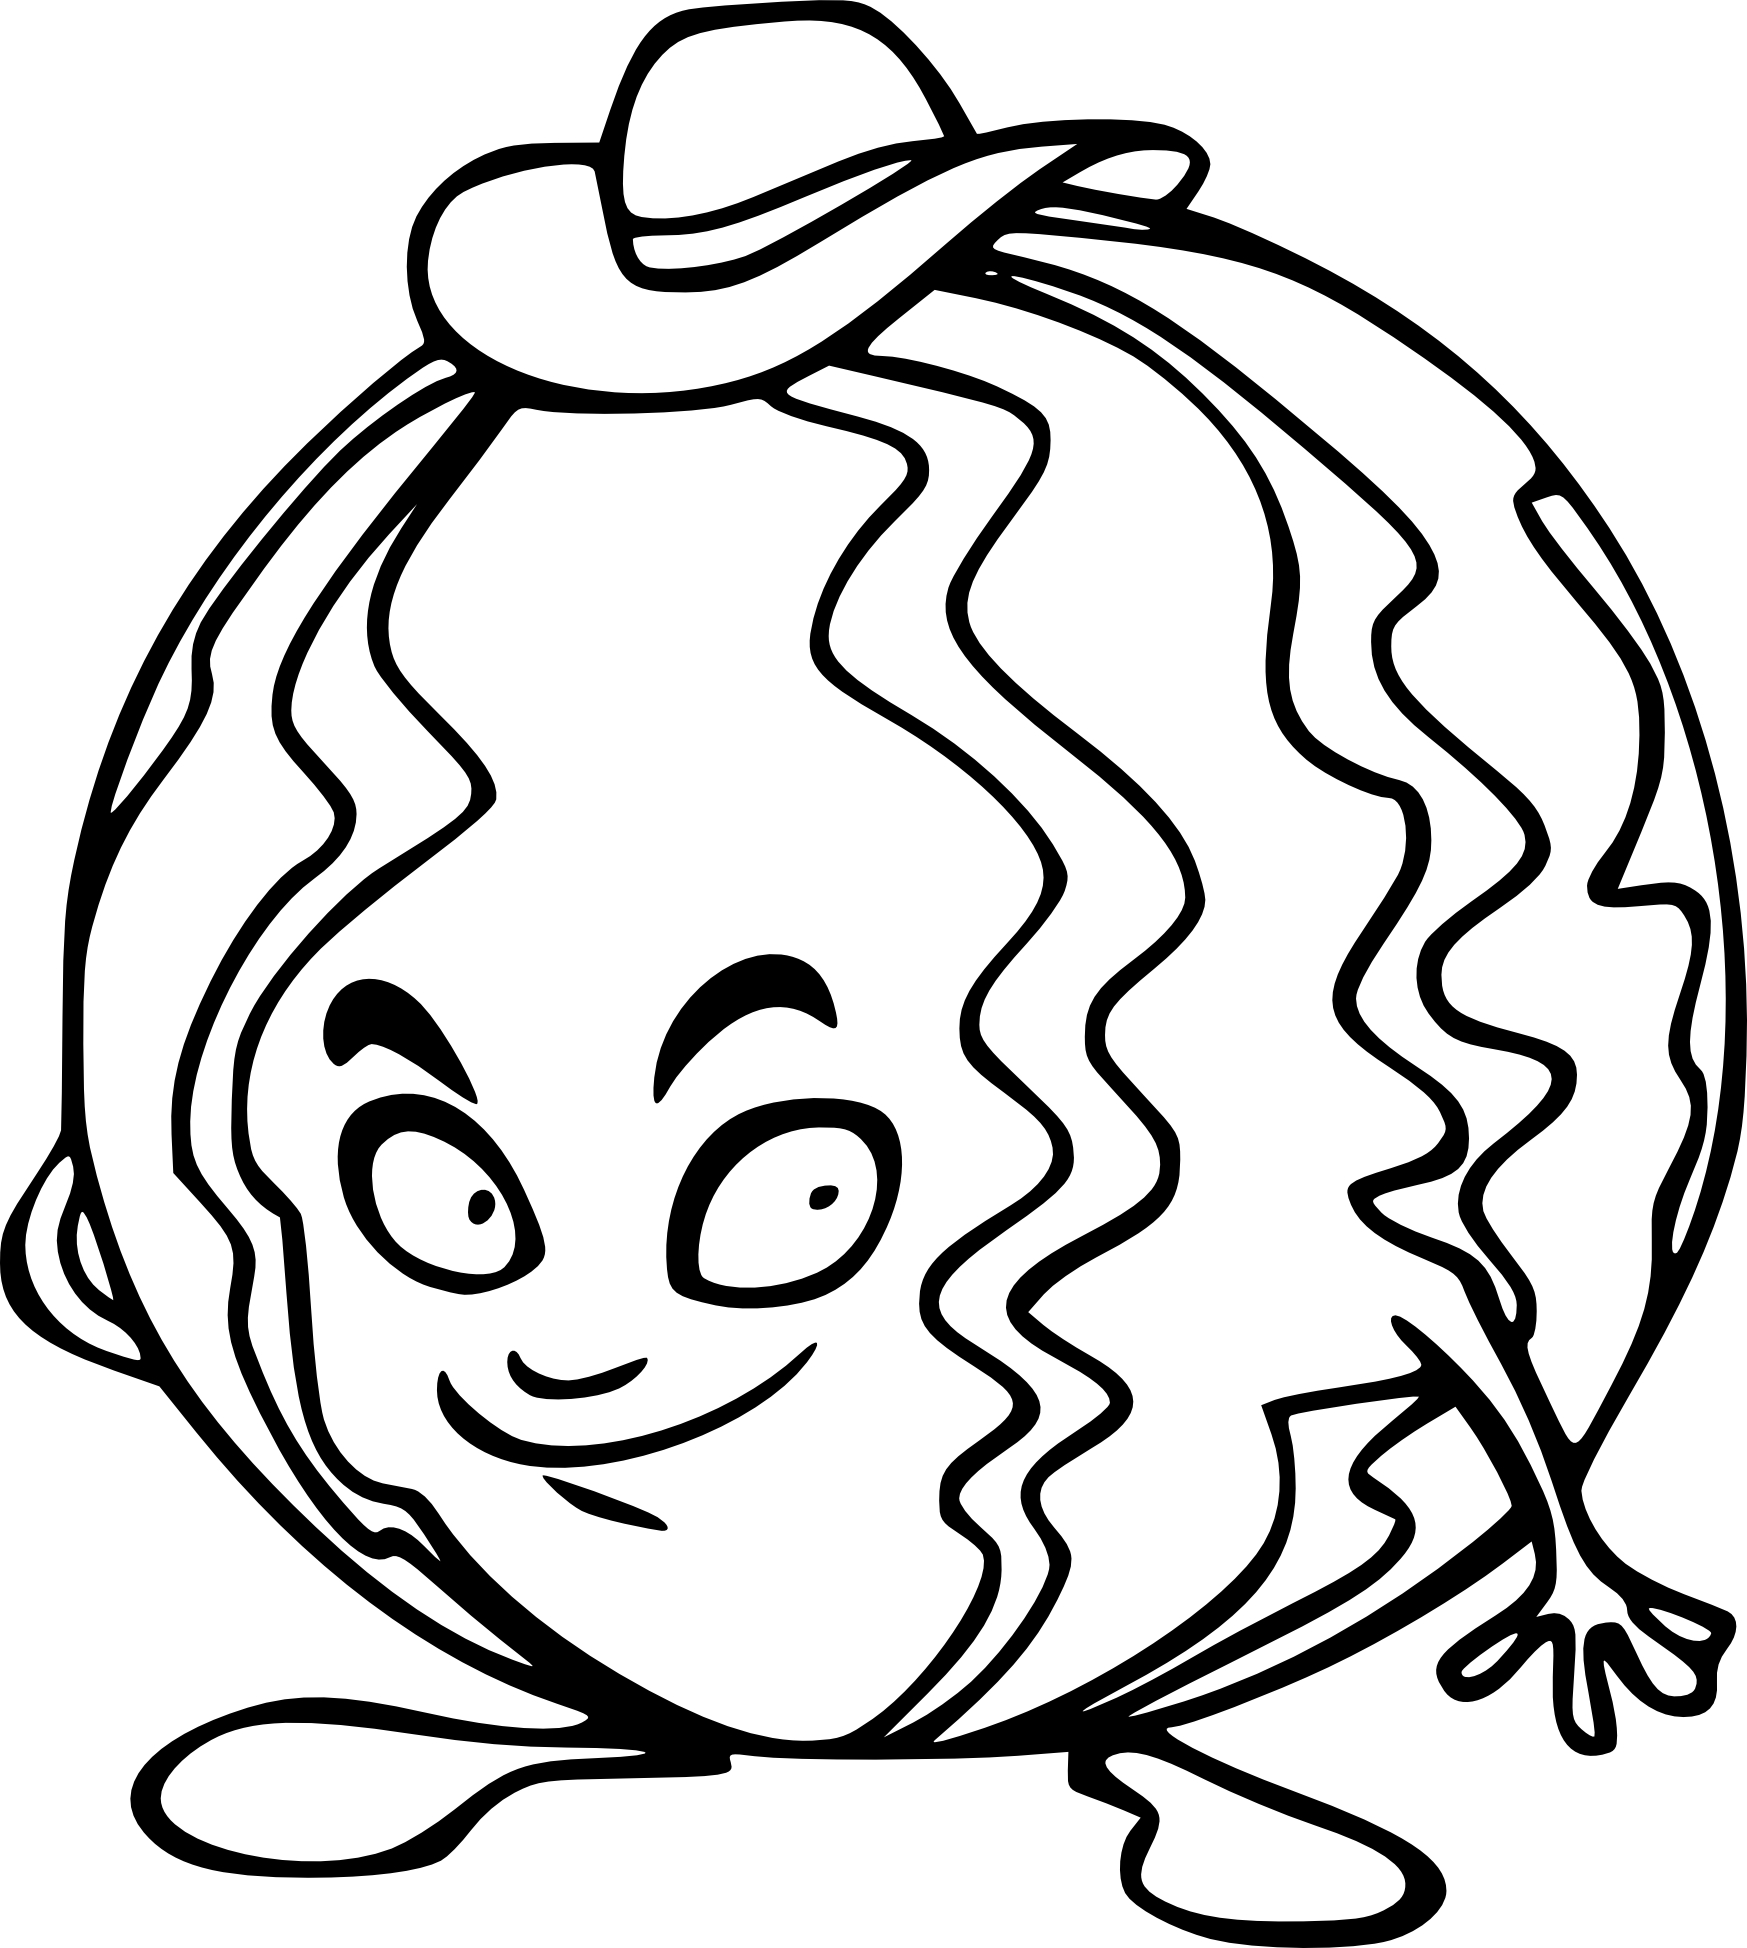 Face Paste coloring page